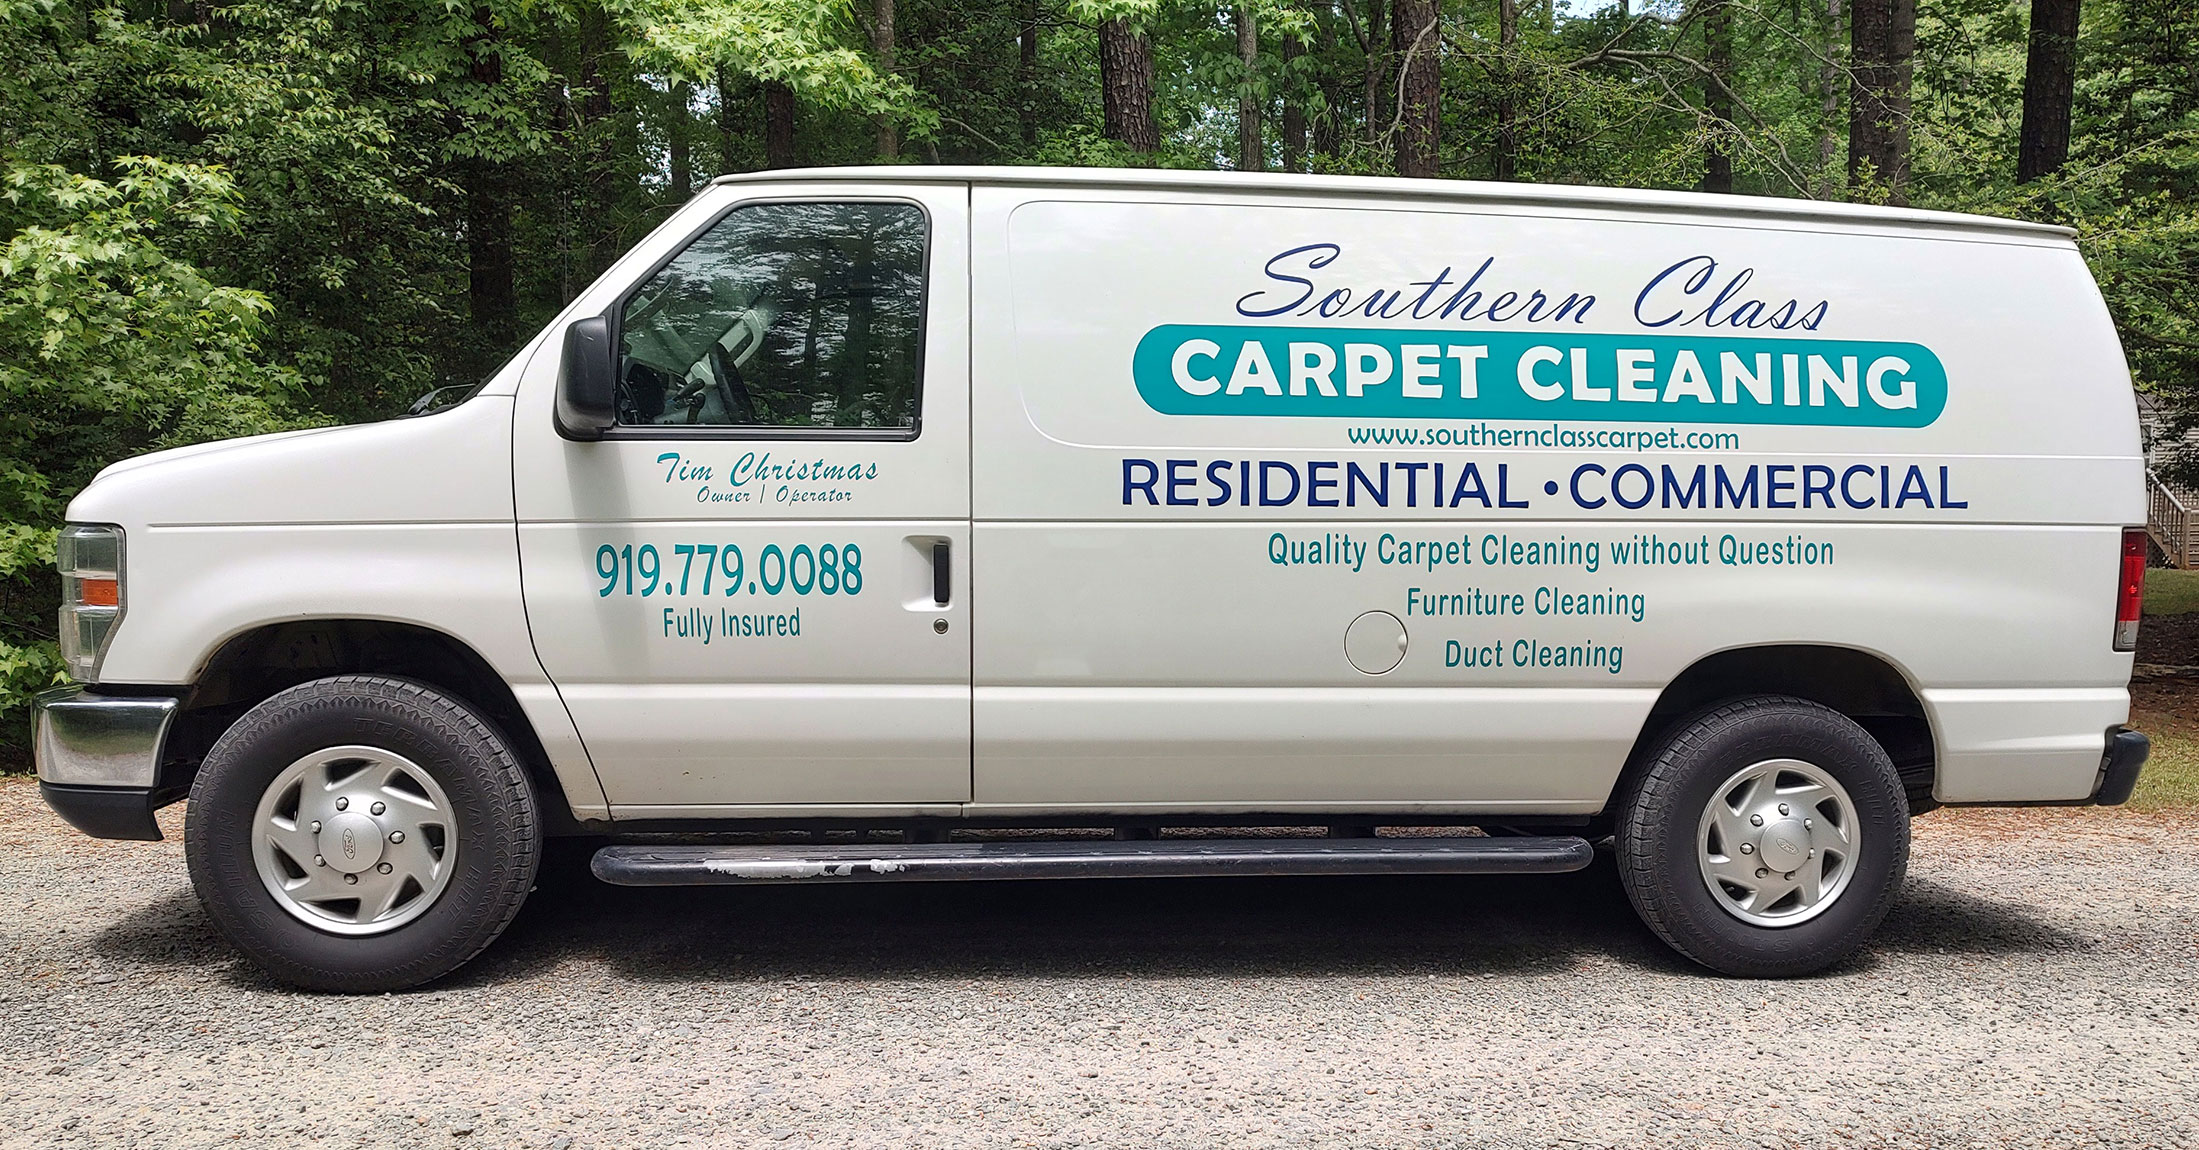 Professional Carpet, Upholstery and Tile & Grout Cleaning in Raleigh North Carolina